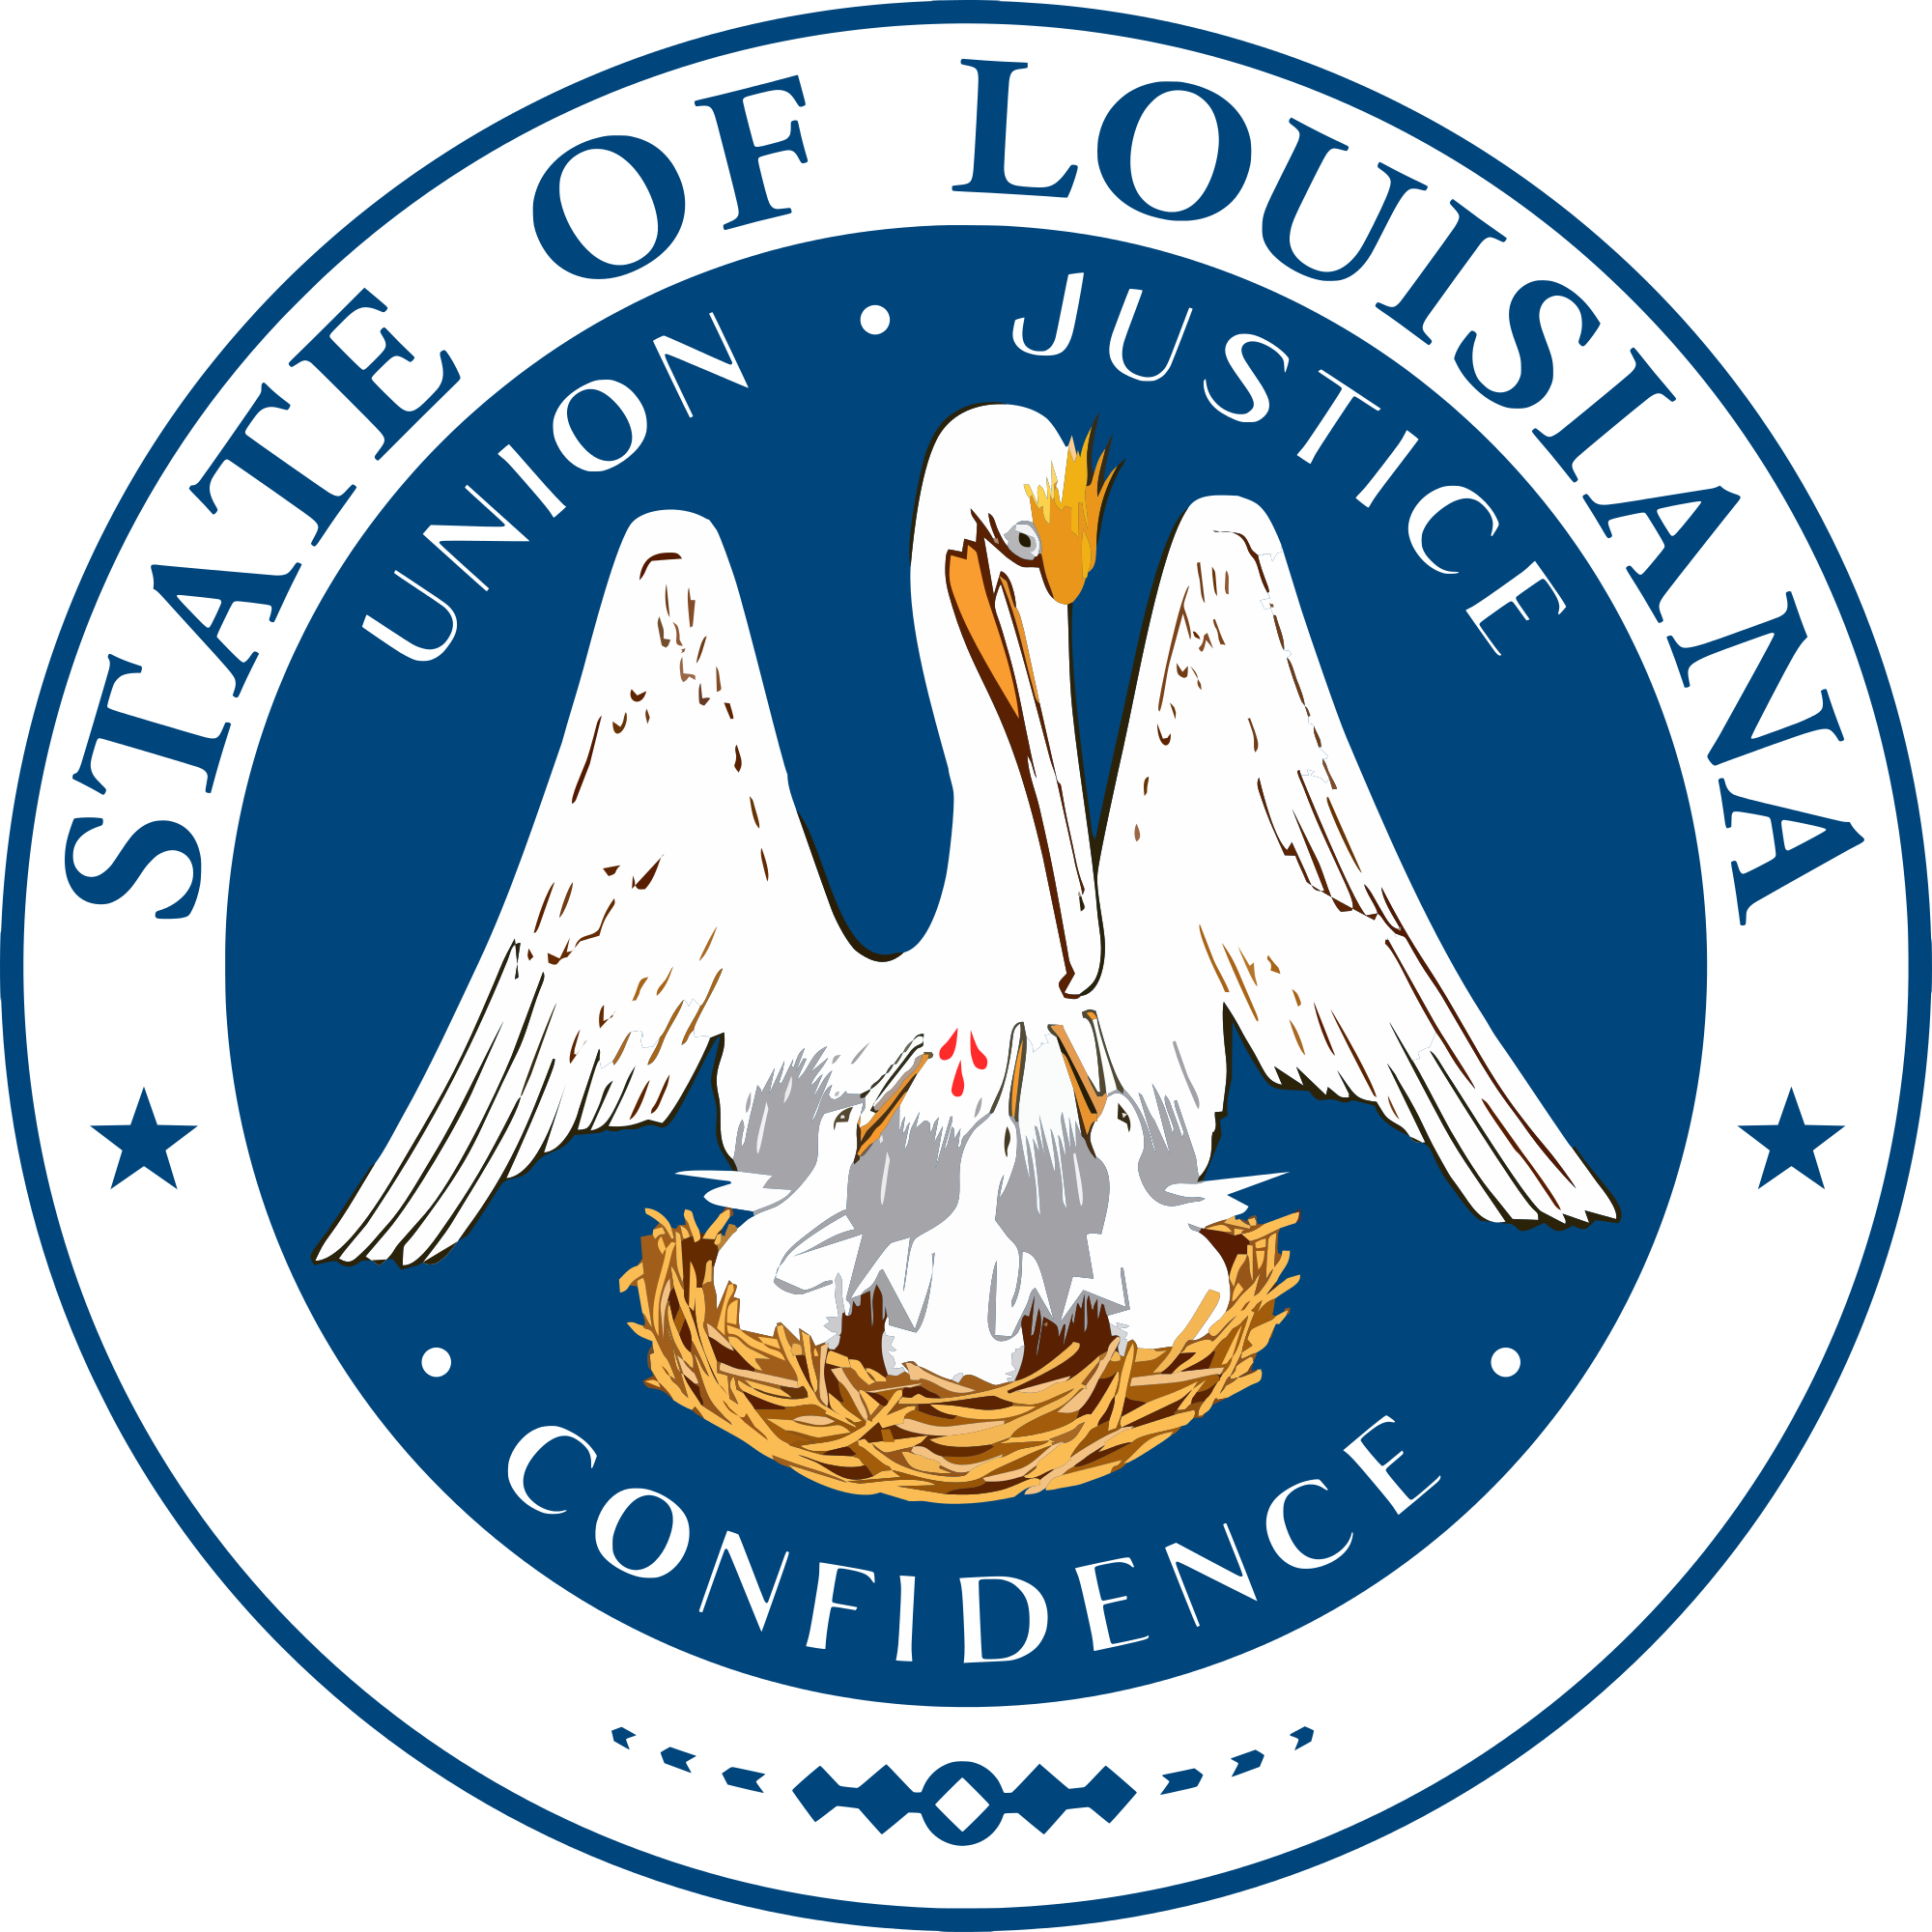 Bartending License Requirements for Louisiana - Bartending License Help